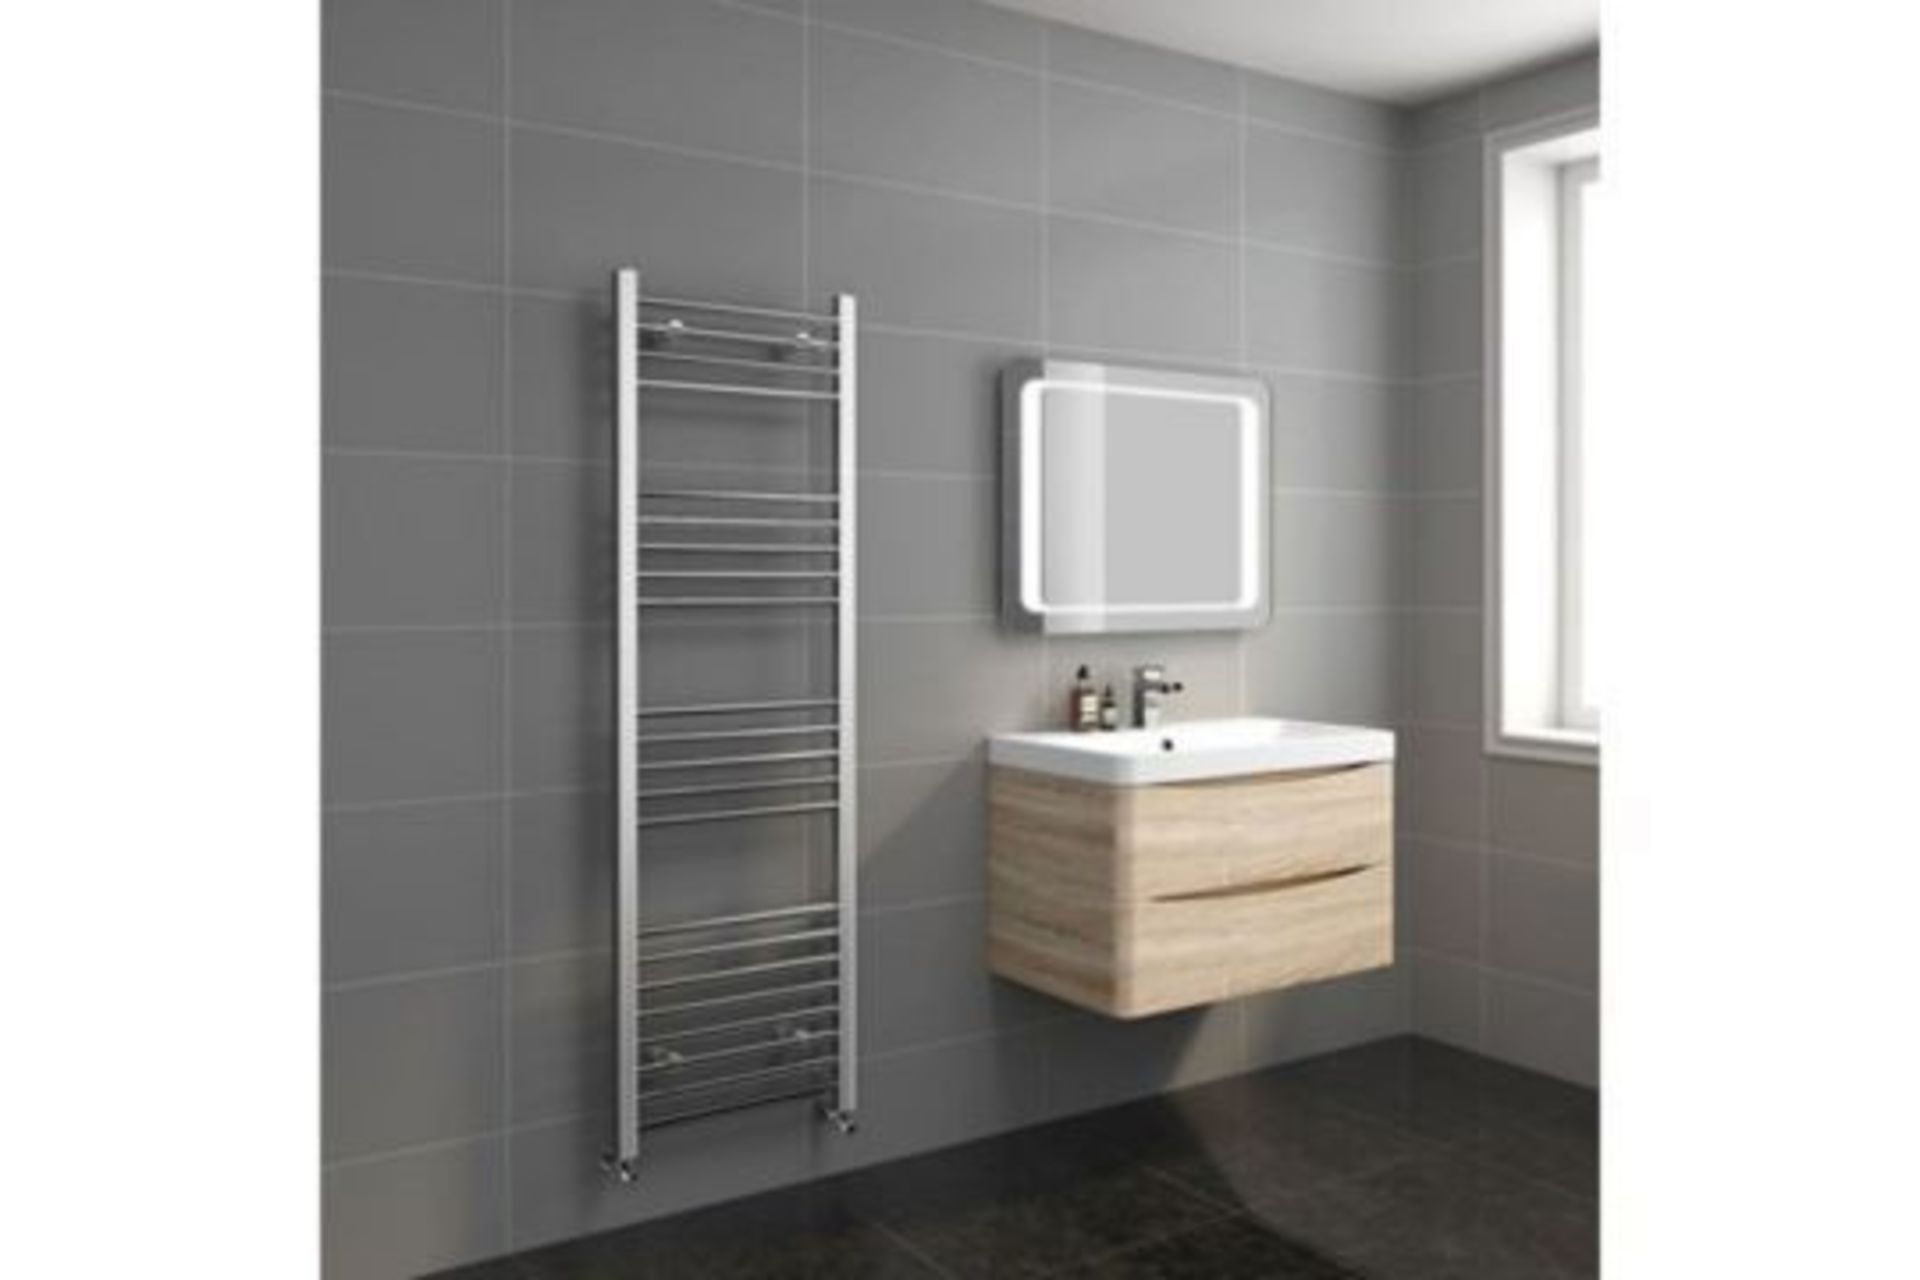 New & Boxed 1600x500mm - 20mm Tubes - Chrome Heated Straight Rail Ladder Towel Radiator. - Image 2 of 2